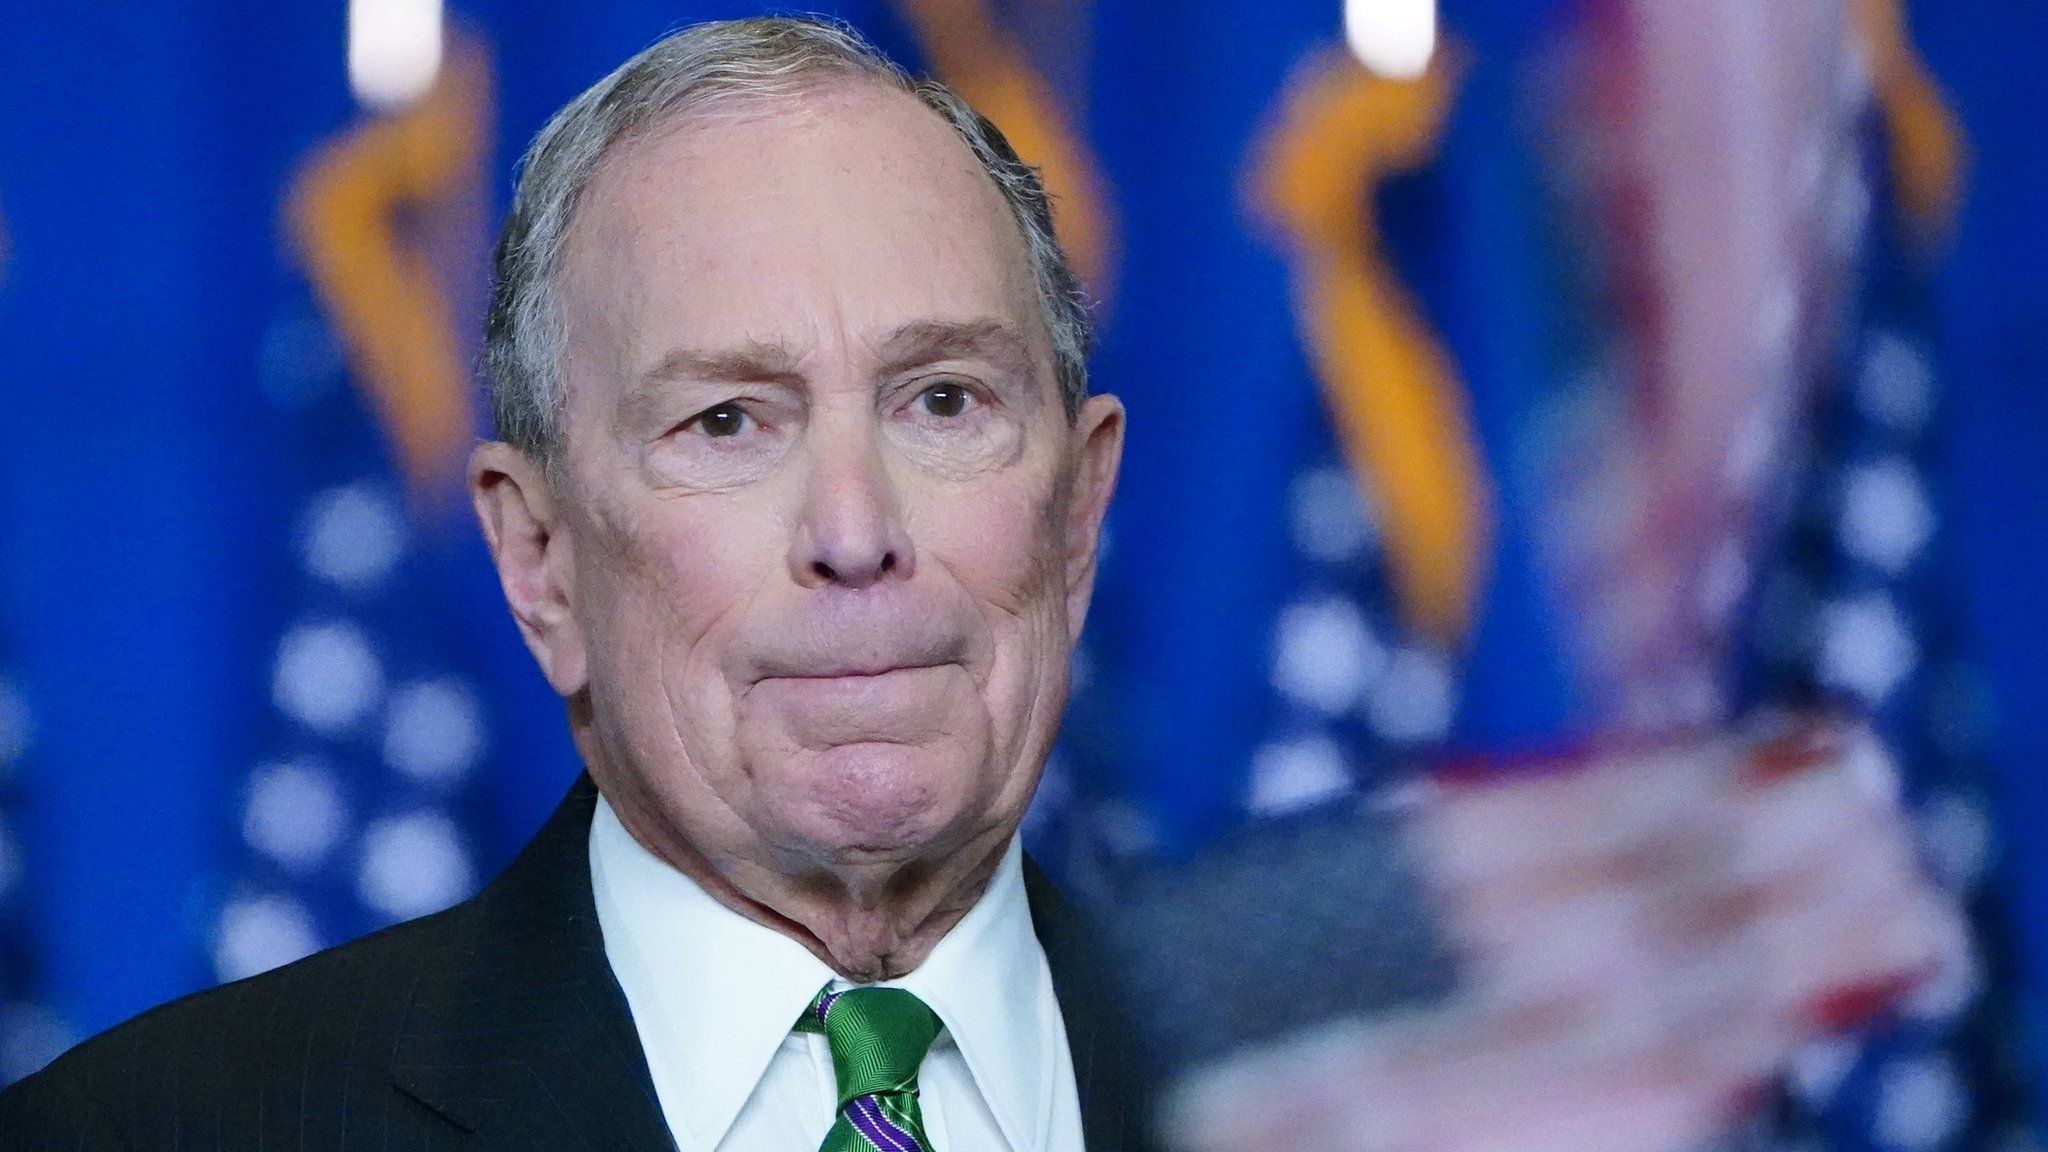 Mike Bloomberg ends his campaign for president in Manhattan